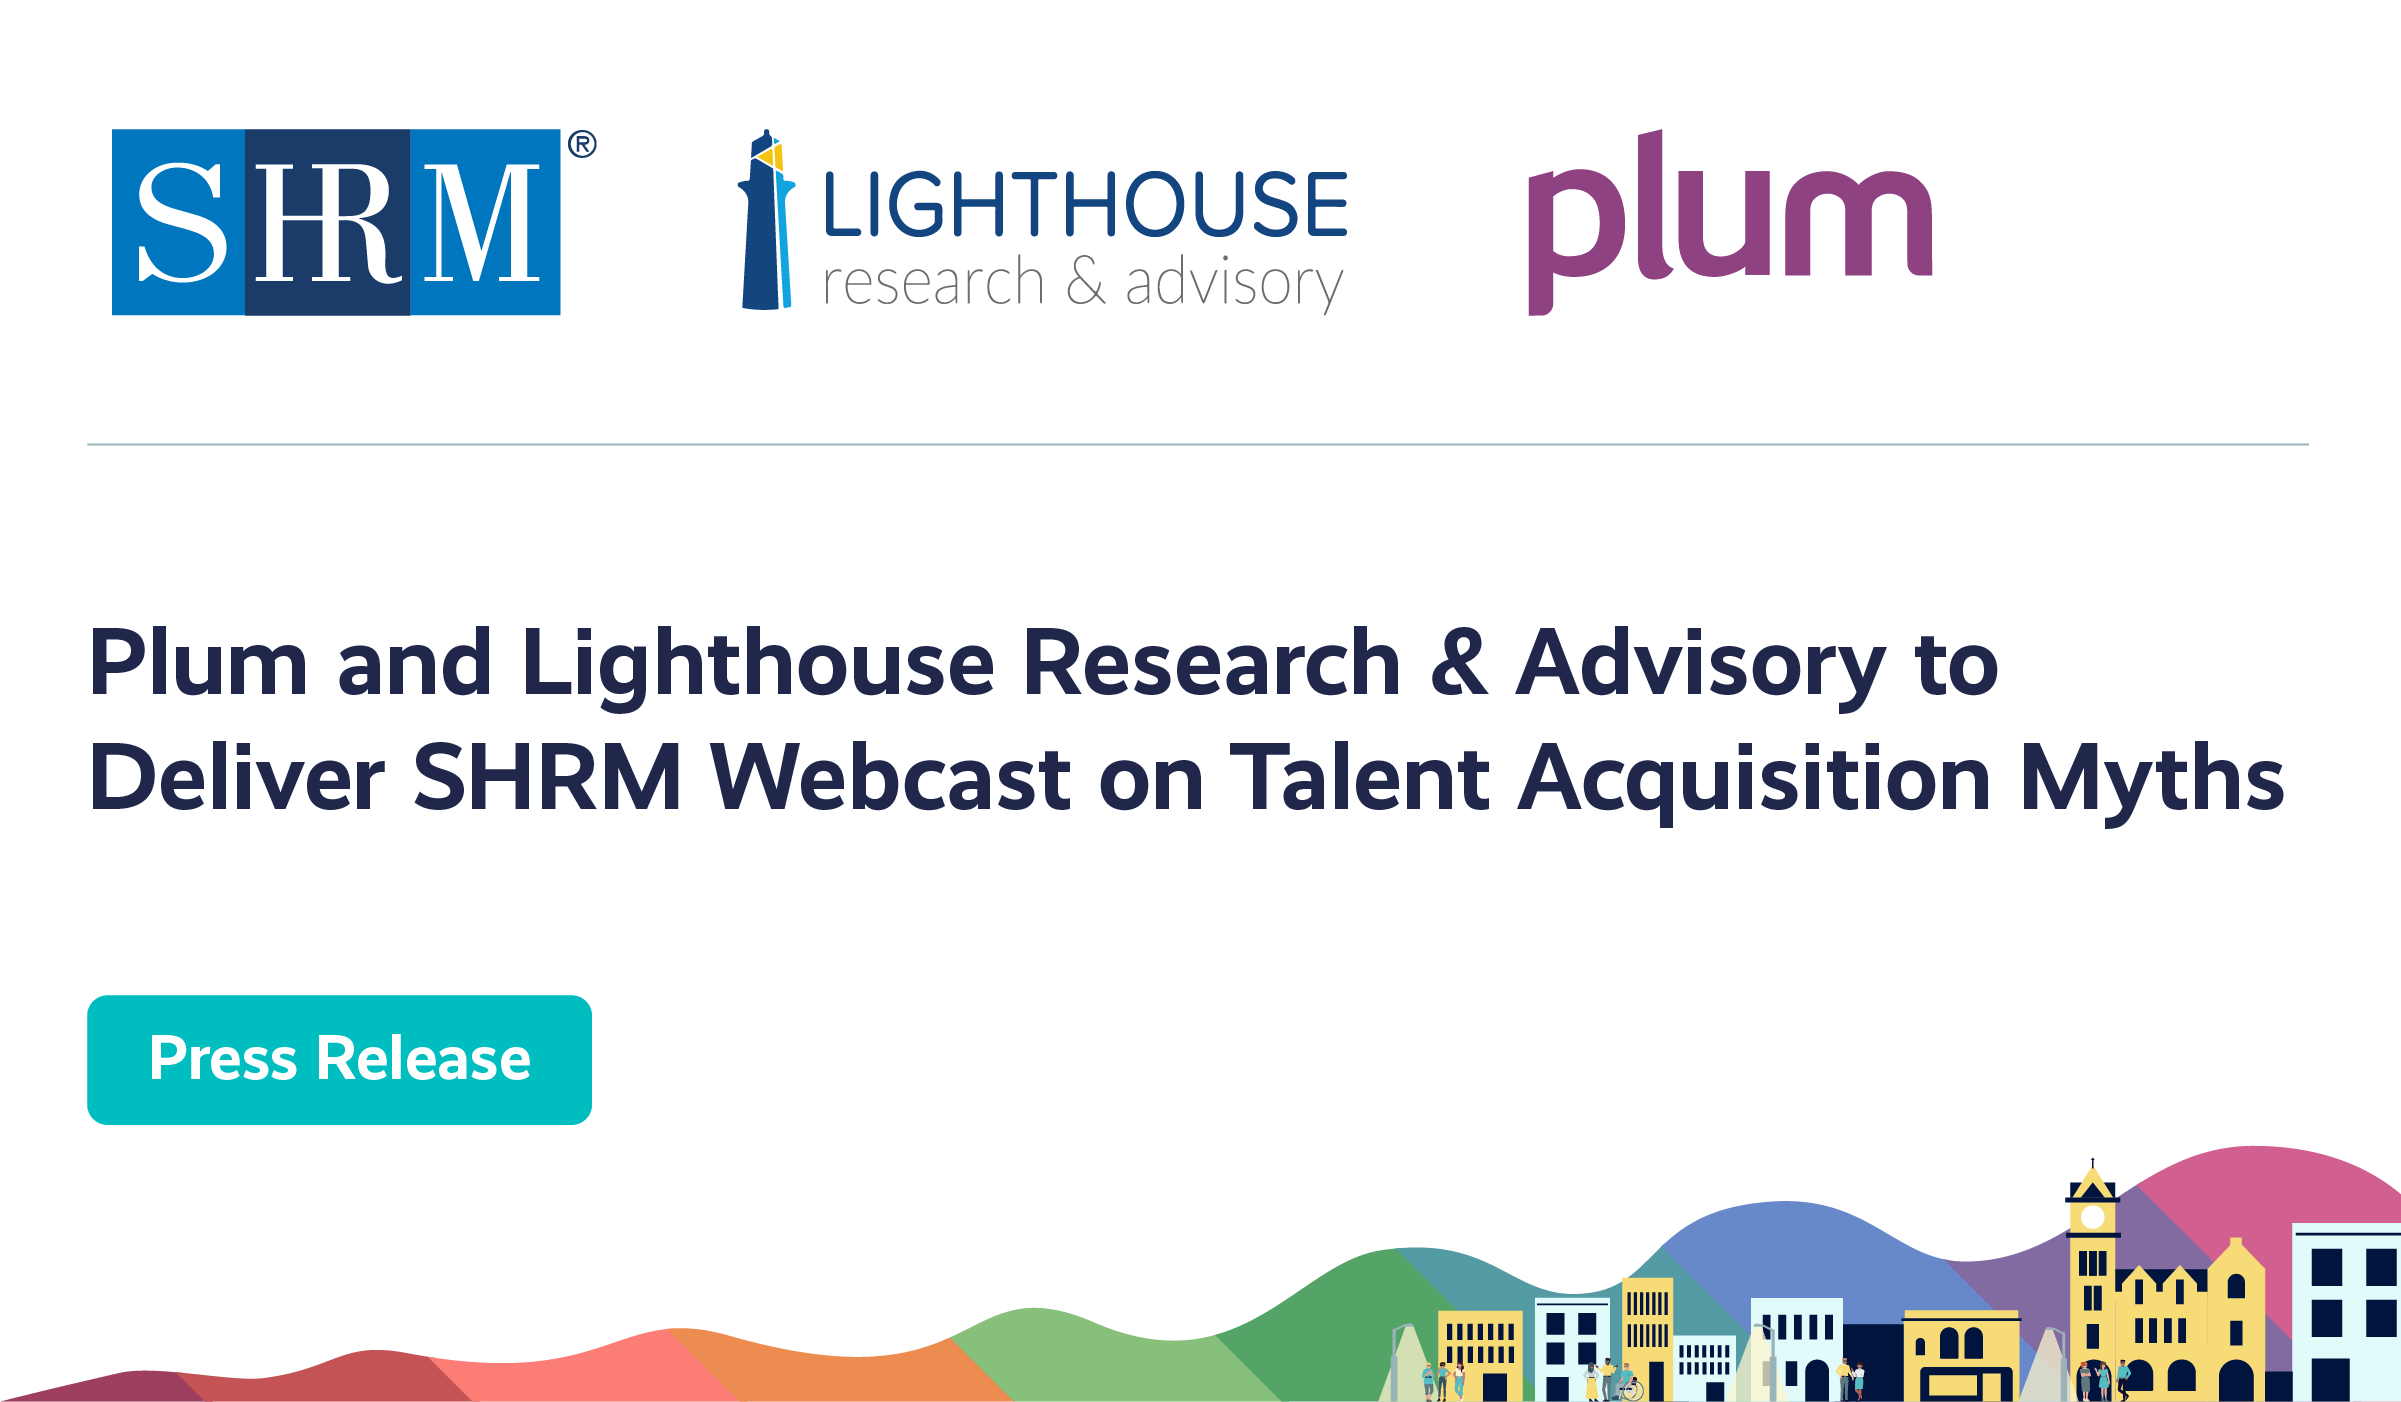 Plum and Lighthouse Research & Advisory to Deliver SHRM Webcast on Talent Acquisition Myths